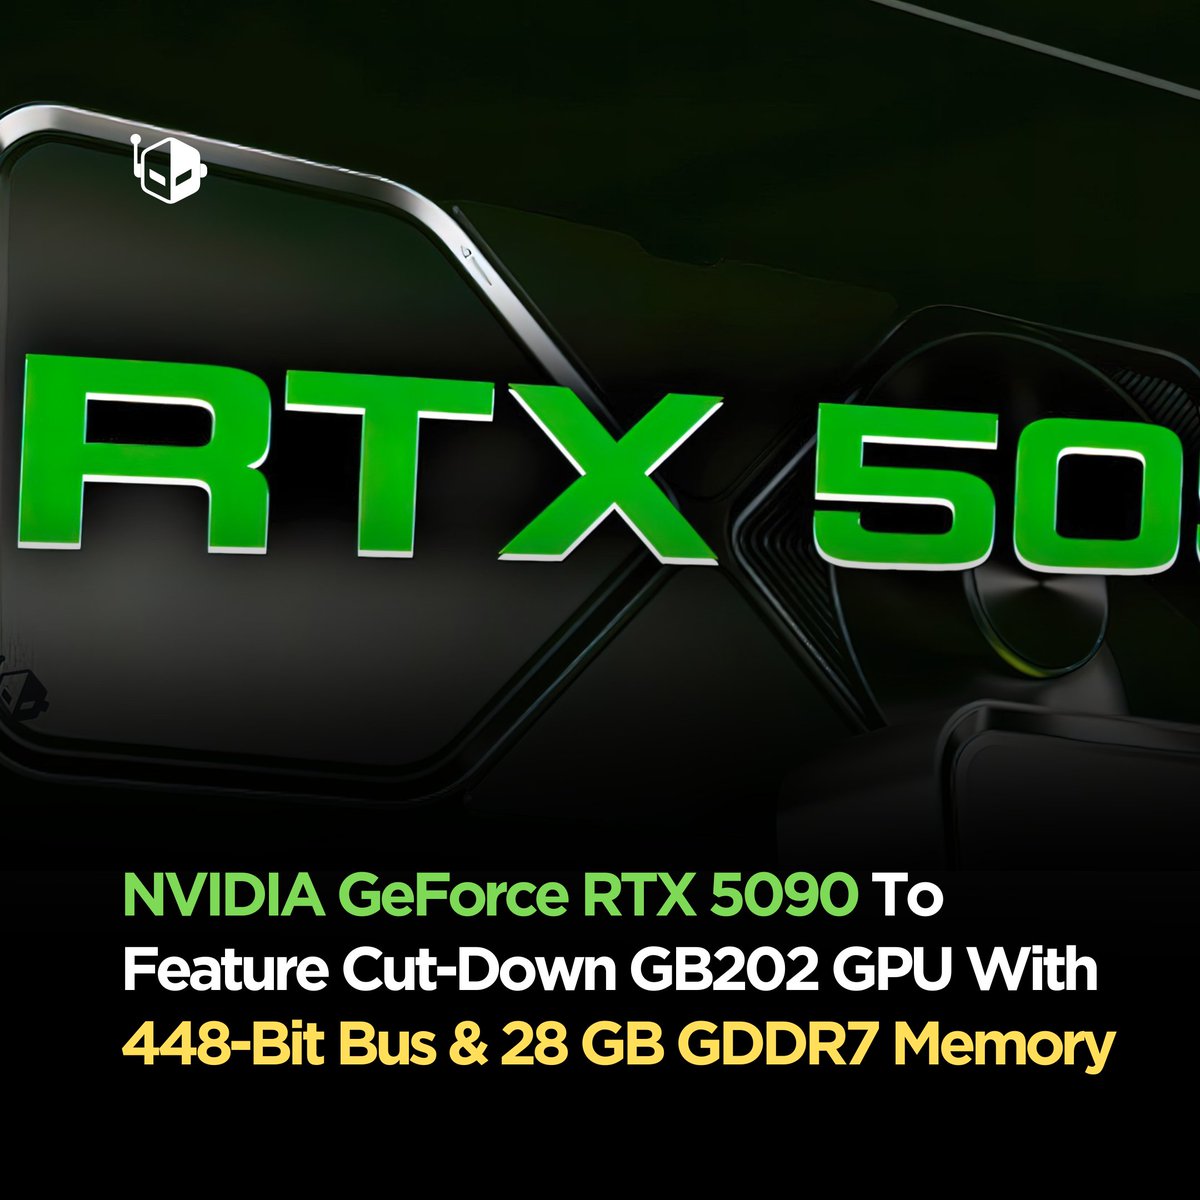 NVIDIA GeForce RTX 5090 graphics cards are rumored to have a cut-down 448-bit bus interface for up to 28 GB GDDR7 memory. wccftech.com/nvidia-geforce…